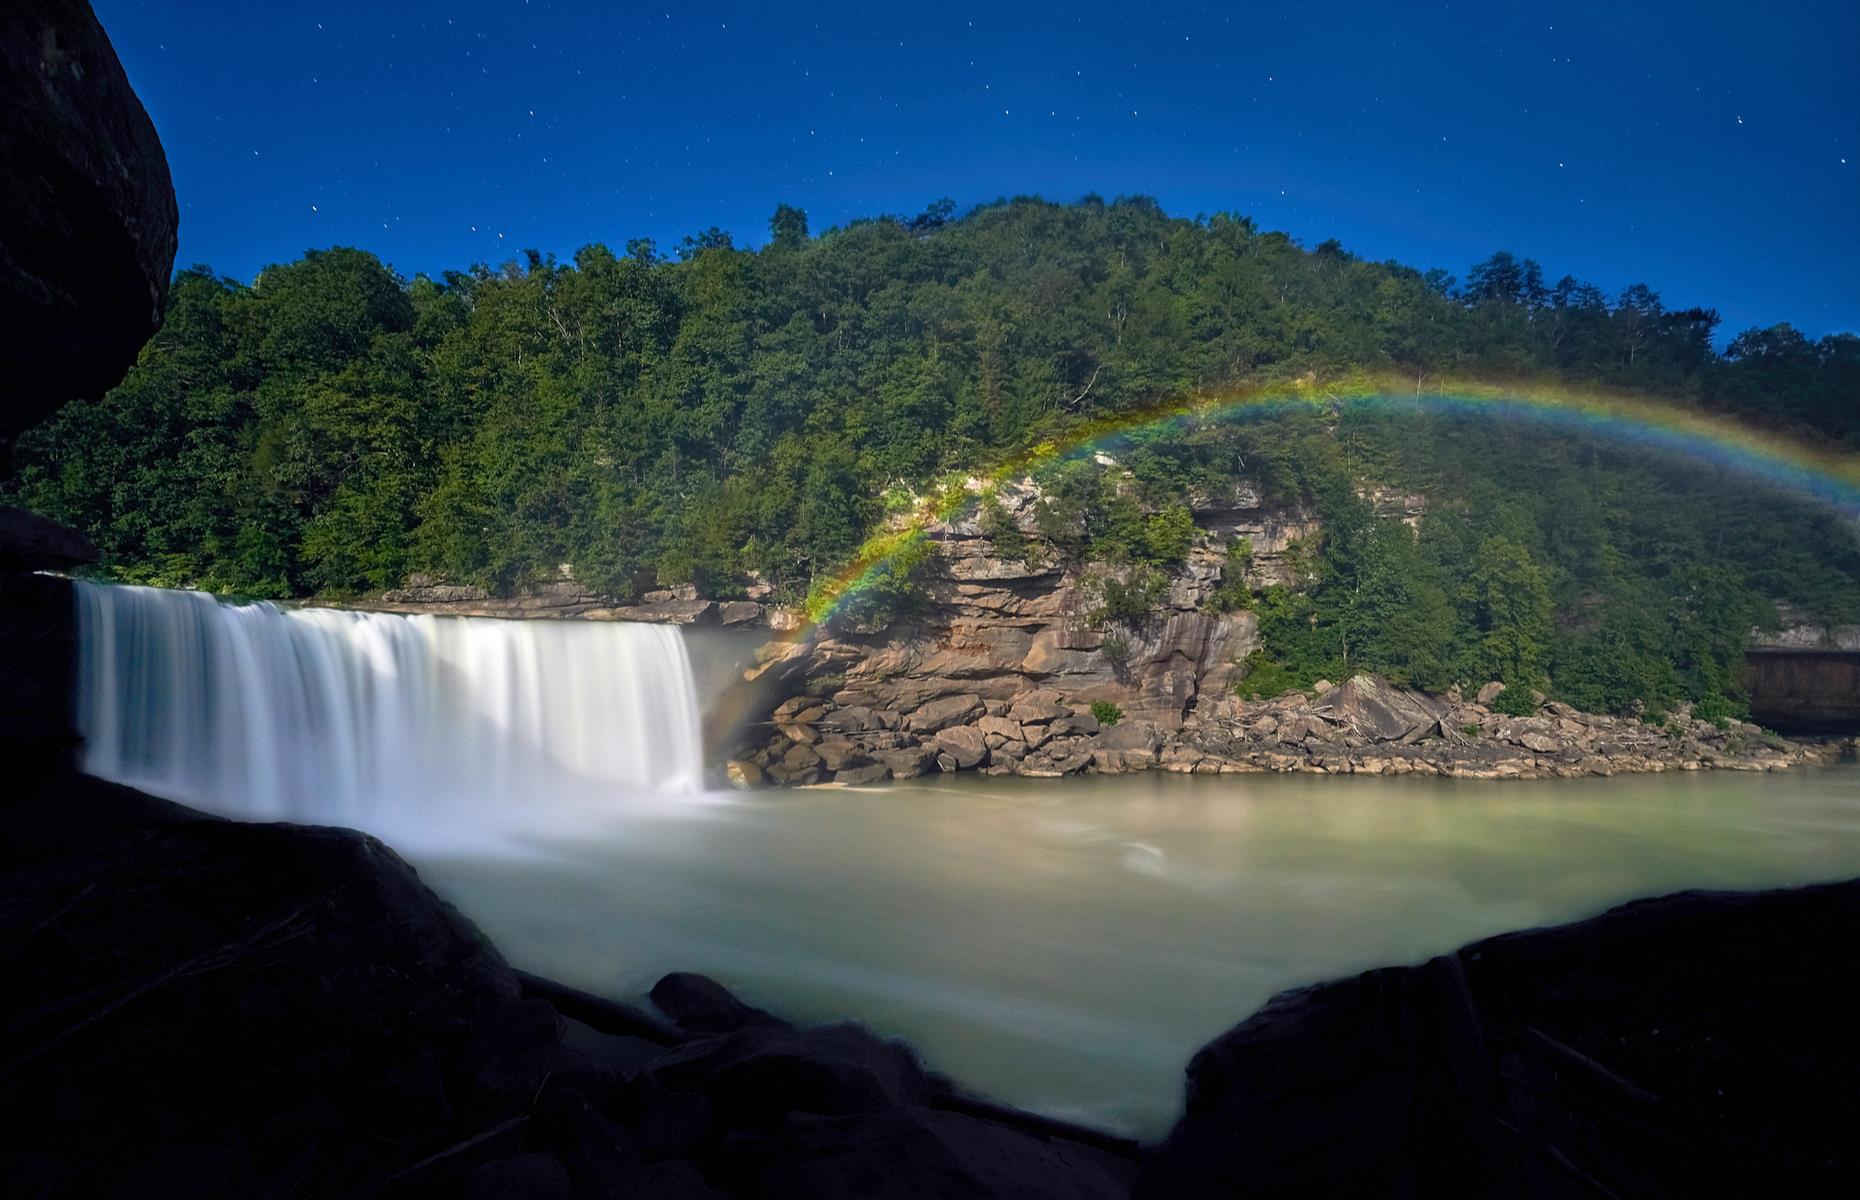 Slide 26 of 100: One of Kentucky's top natural wonders, Cumberland Falls plunges down for 68 feet (21m) and spools out to a width of 120 feet (37m). But its very respectable size isn't what makes the waterfall truly special. It's also known for its moonbows – spectacular nighttime rainbows that show up on clear nights.